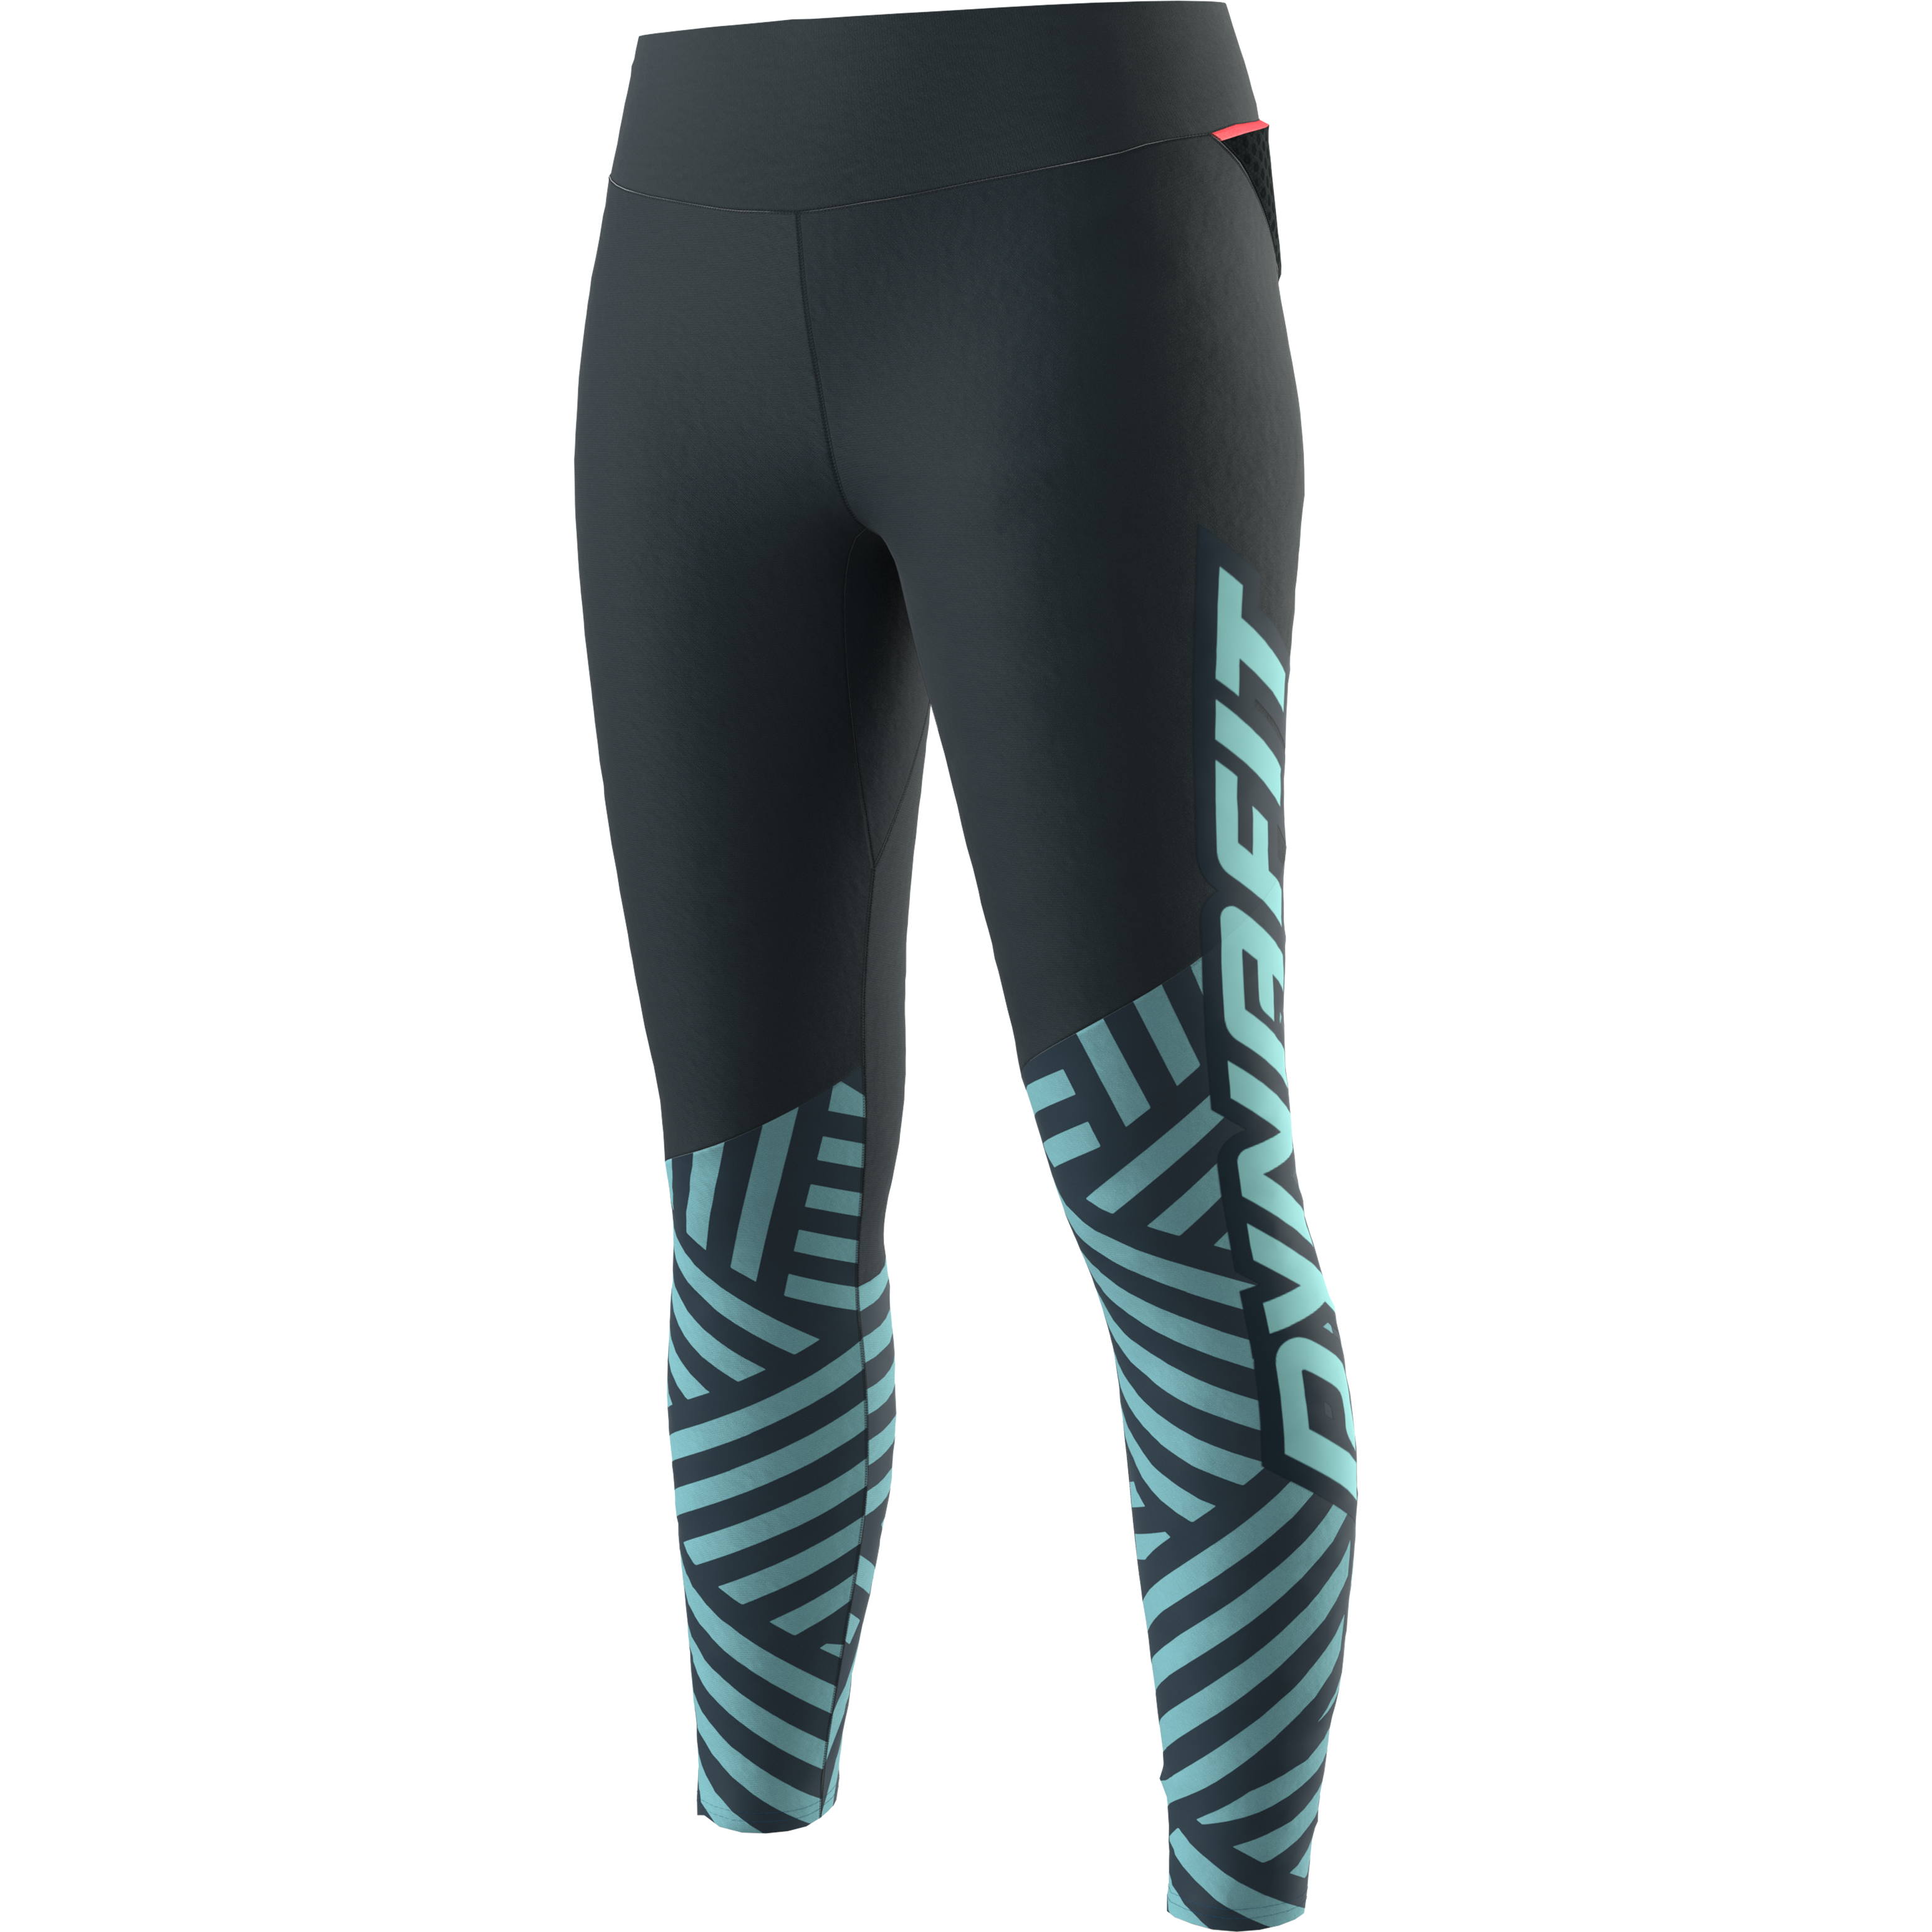 On Trail Tights - Women's